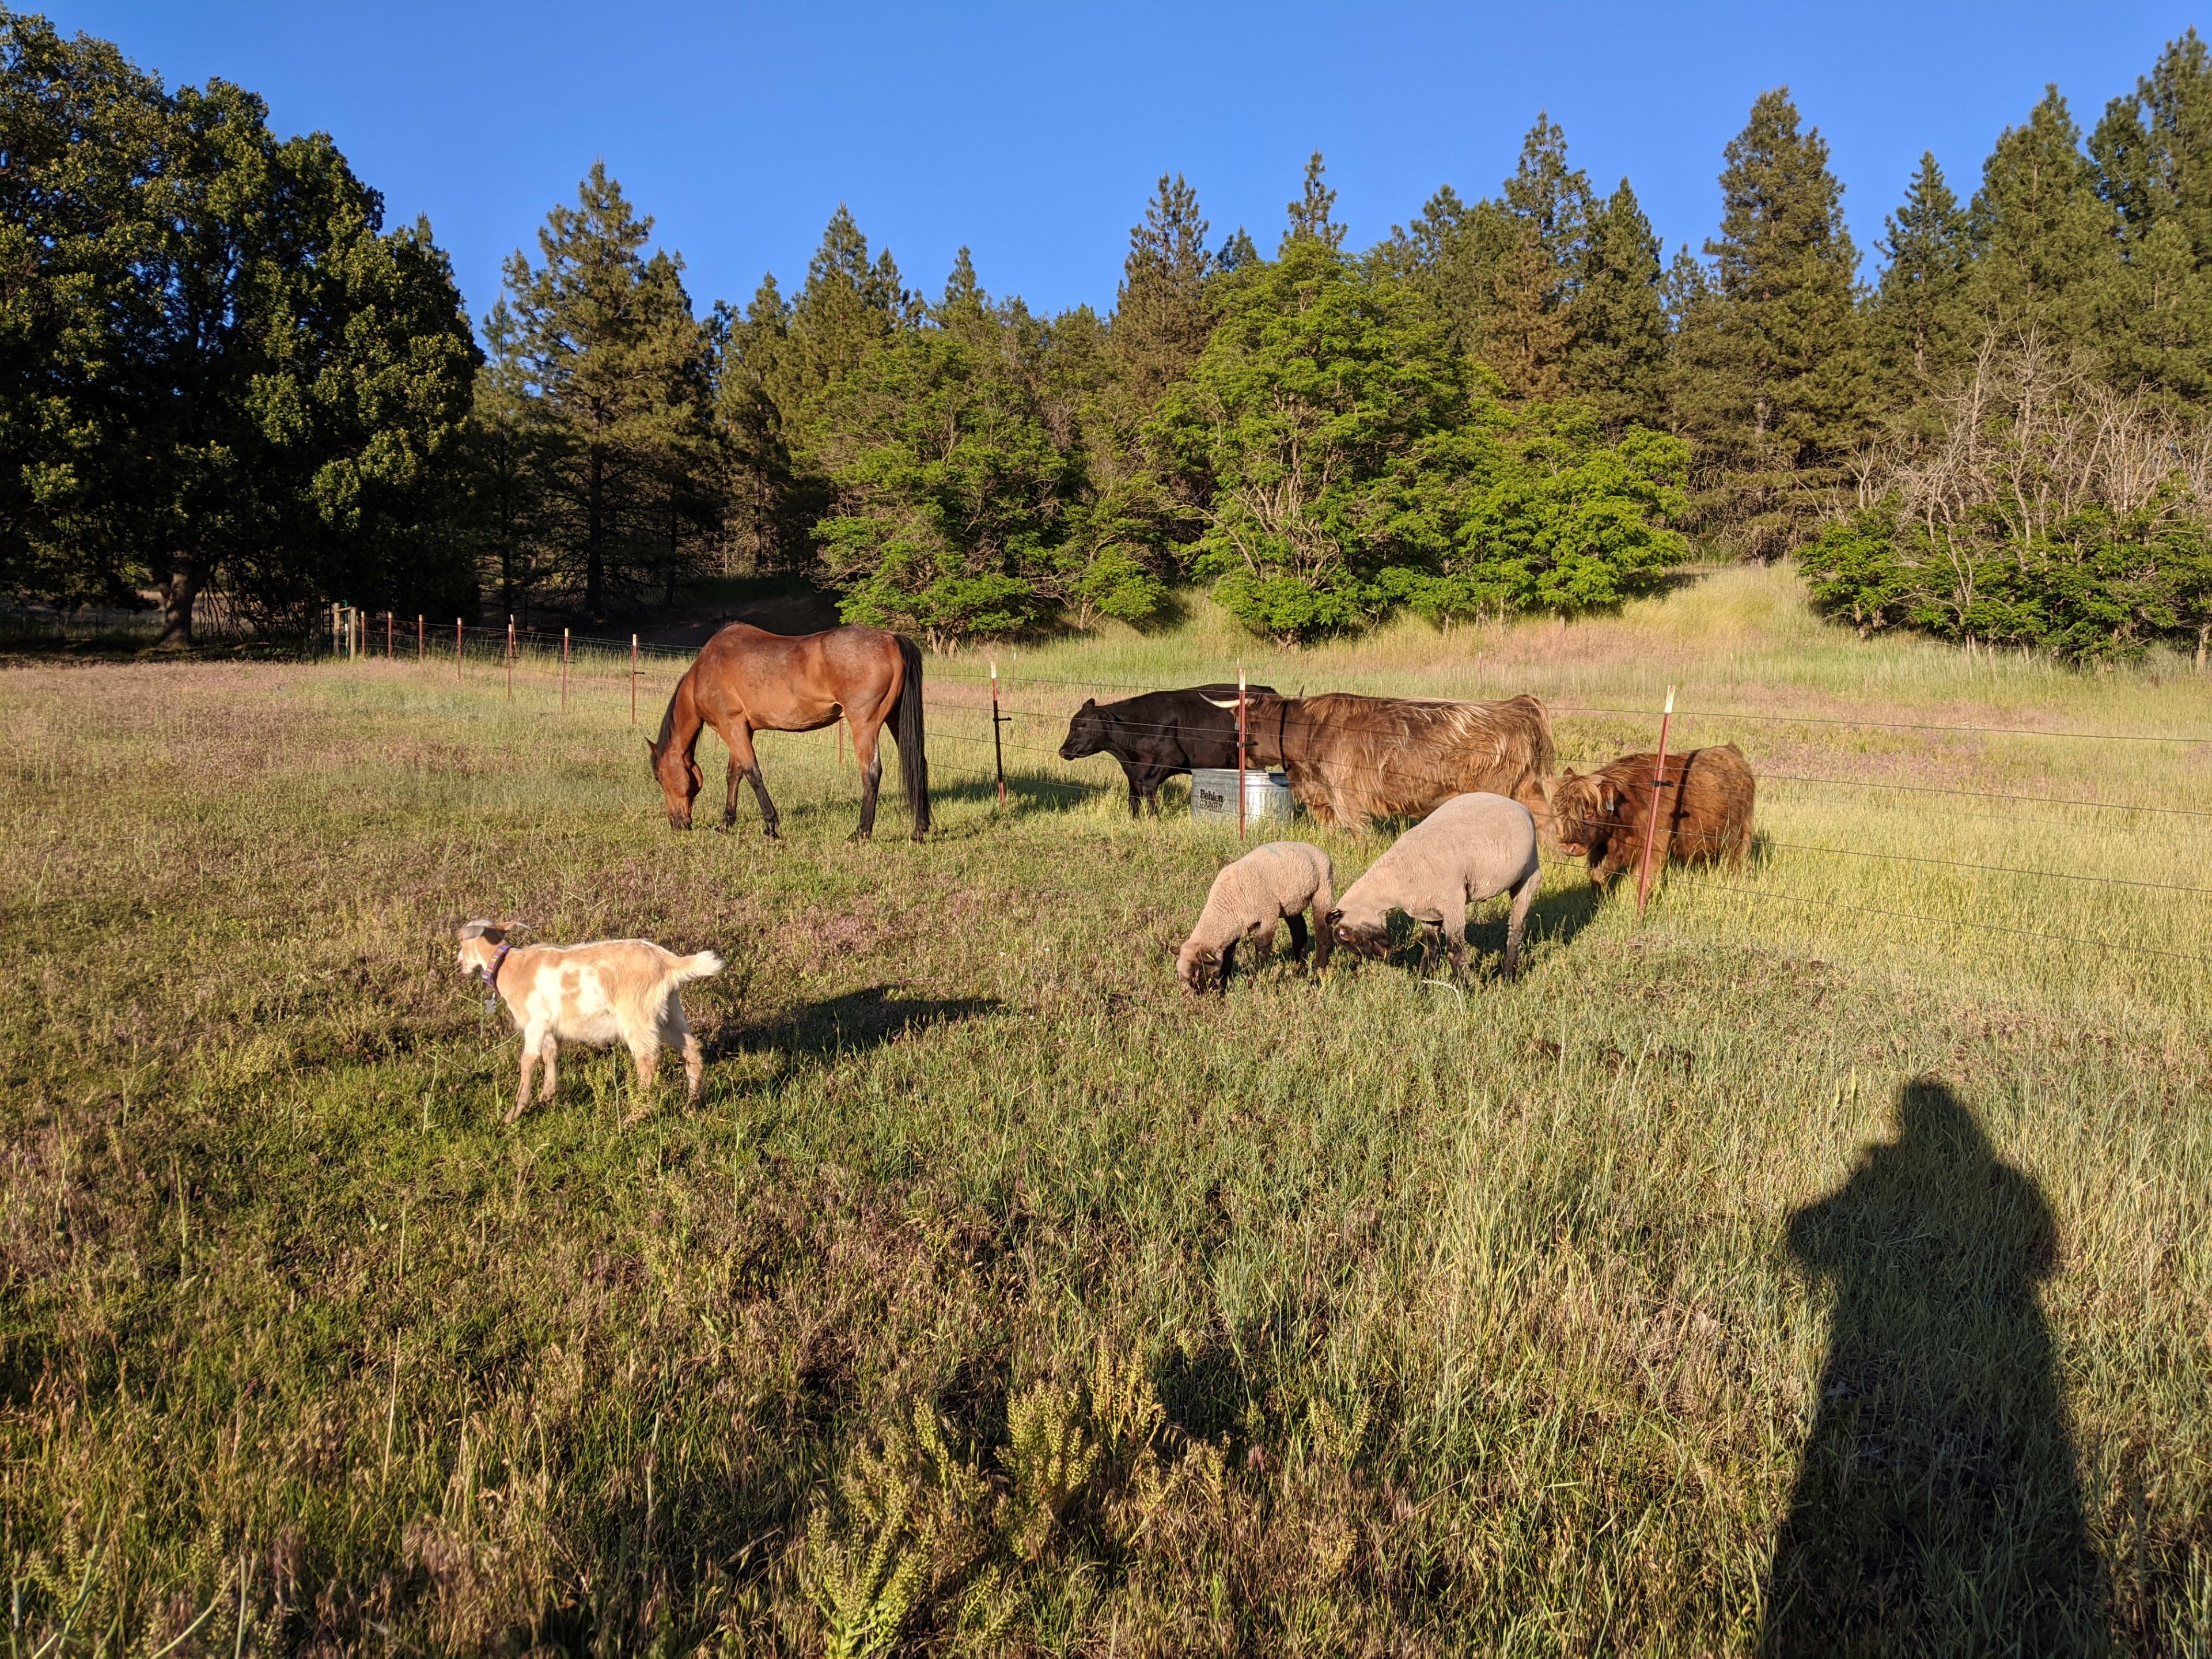 We have an array of livestock on the property that roam and graze. They will come to visit you as they are curious creatures and all friendly. Just watch out for those HORNS!